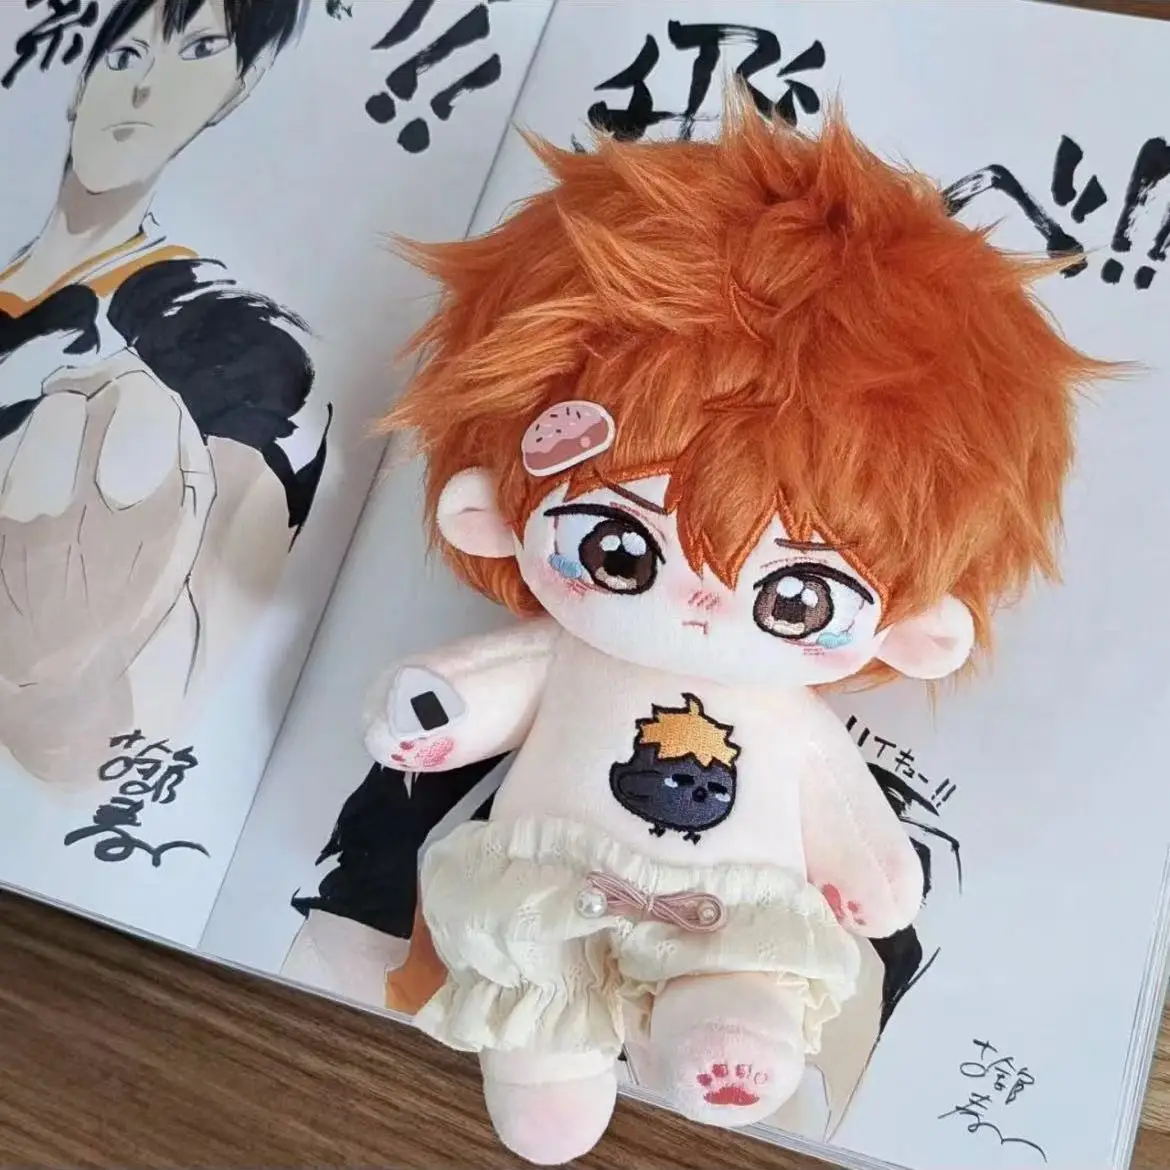 

[In-stock] Action Hinata Shoyo 20cm Cotton Dolls Anime Haikyuu Dolls Cute Dress-up Puppet Toys for Kids Adults Collectible Gifts